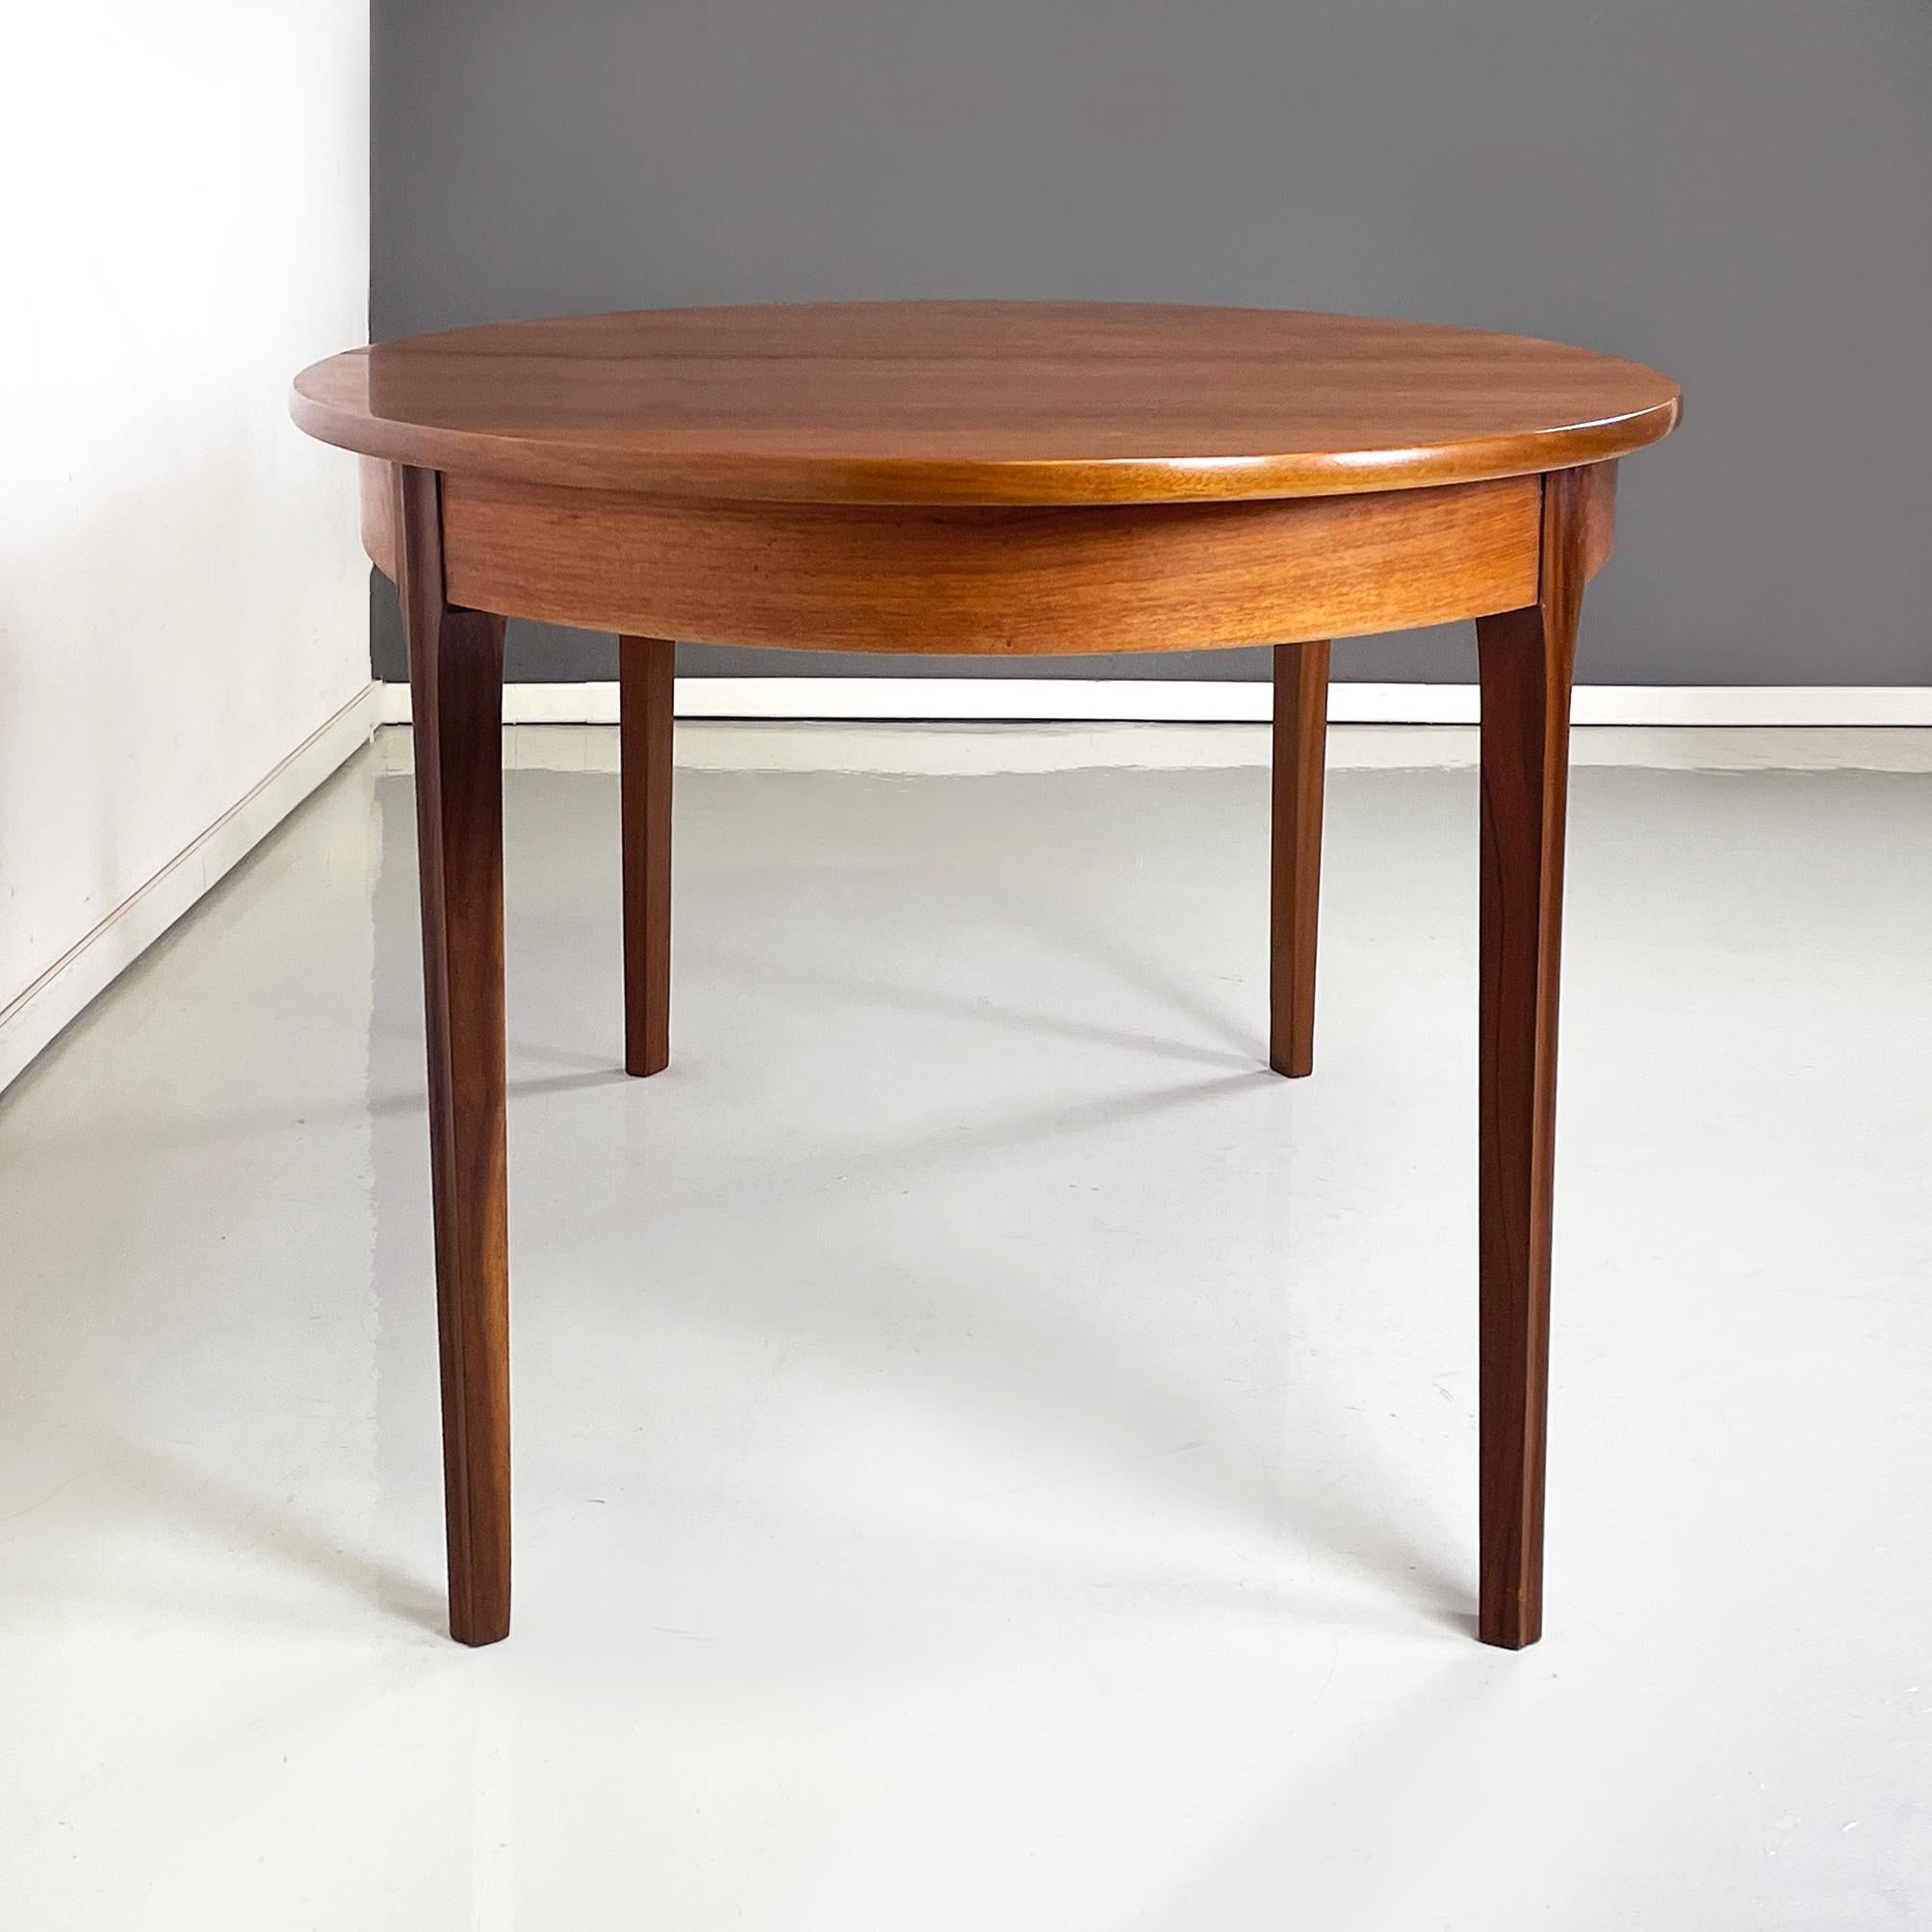 Mid-20th Century Italian mid-century modern Wooden oval dining table with extensions, 1960s